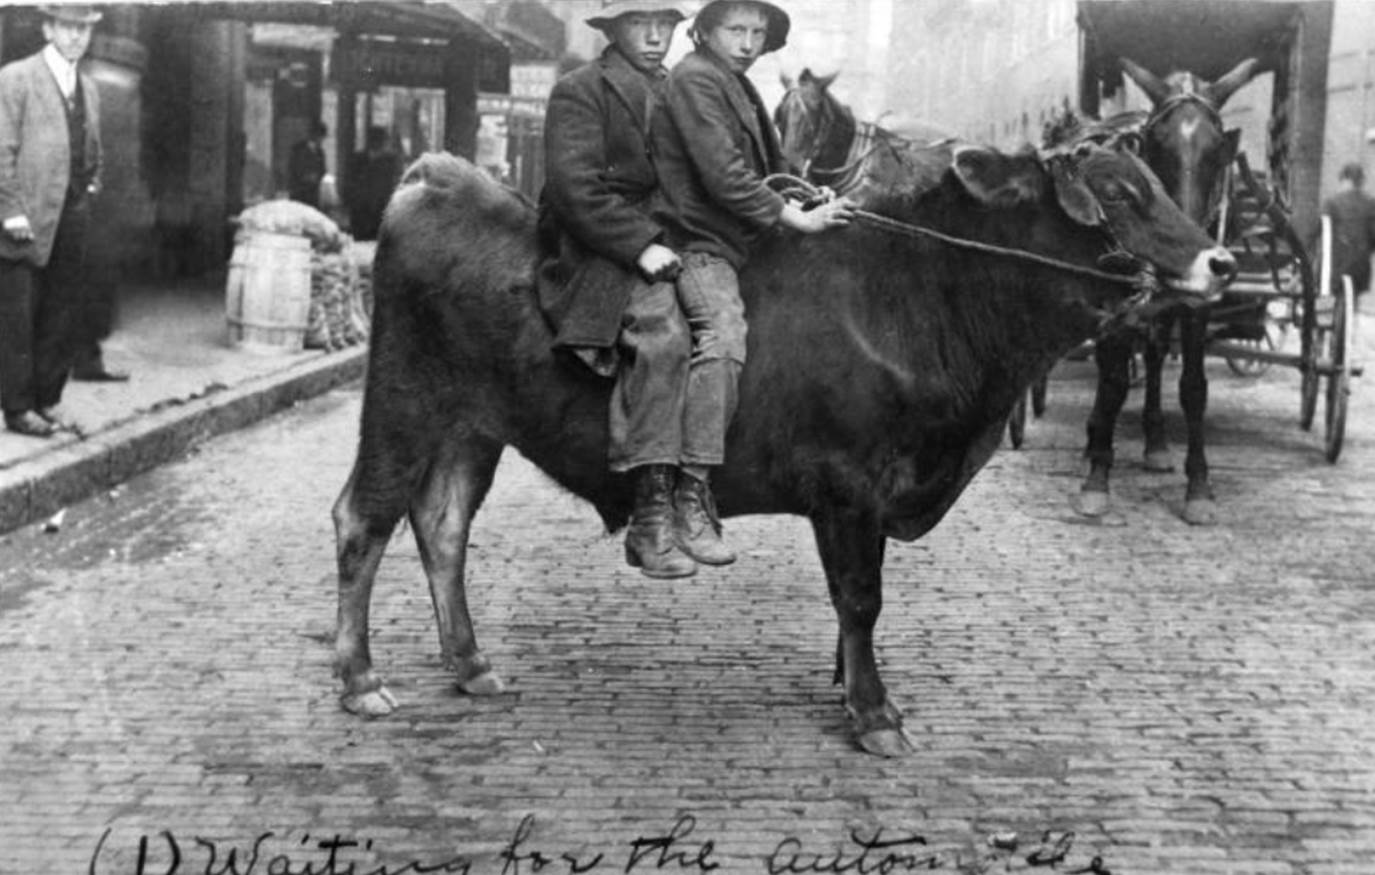 Bill and Jack Winkle (Winkle Boys) on an Ox, Market Square, 1907. McClung Historical Collection.